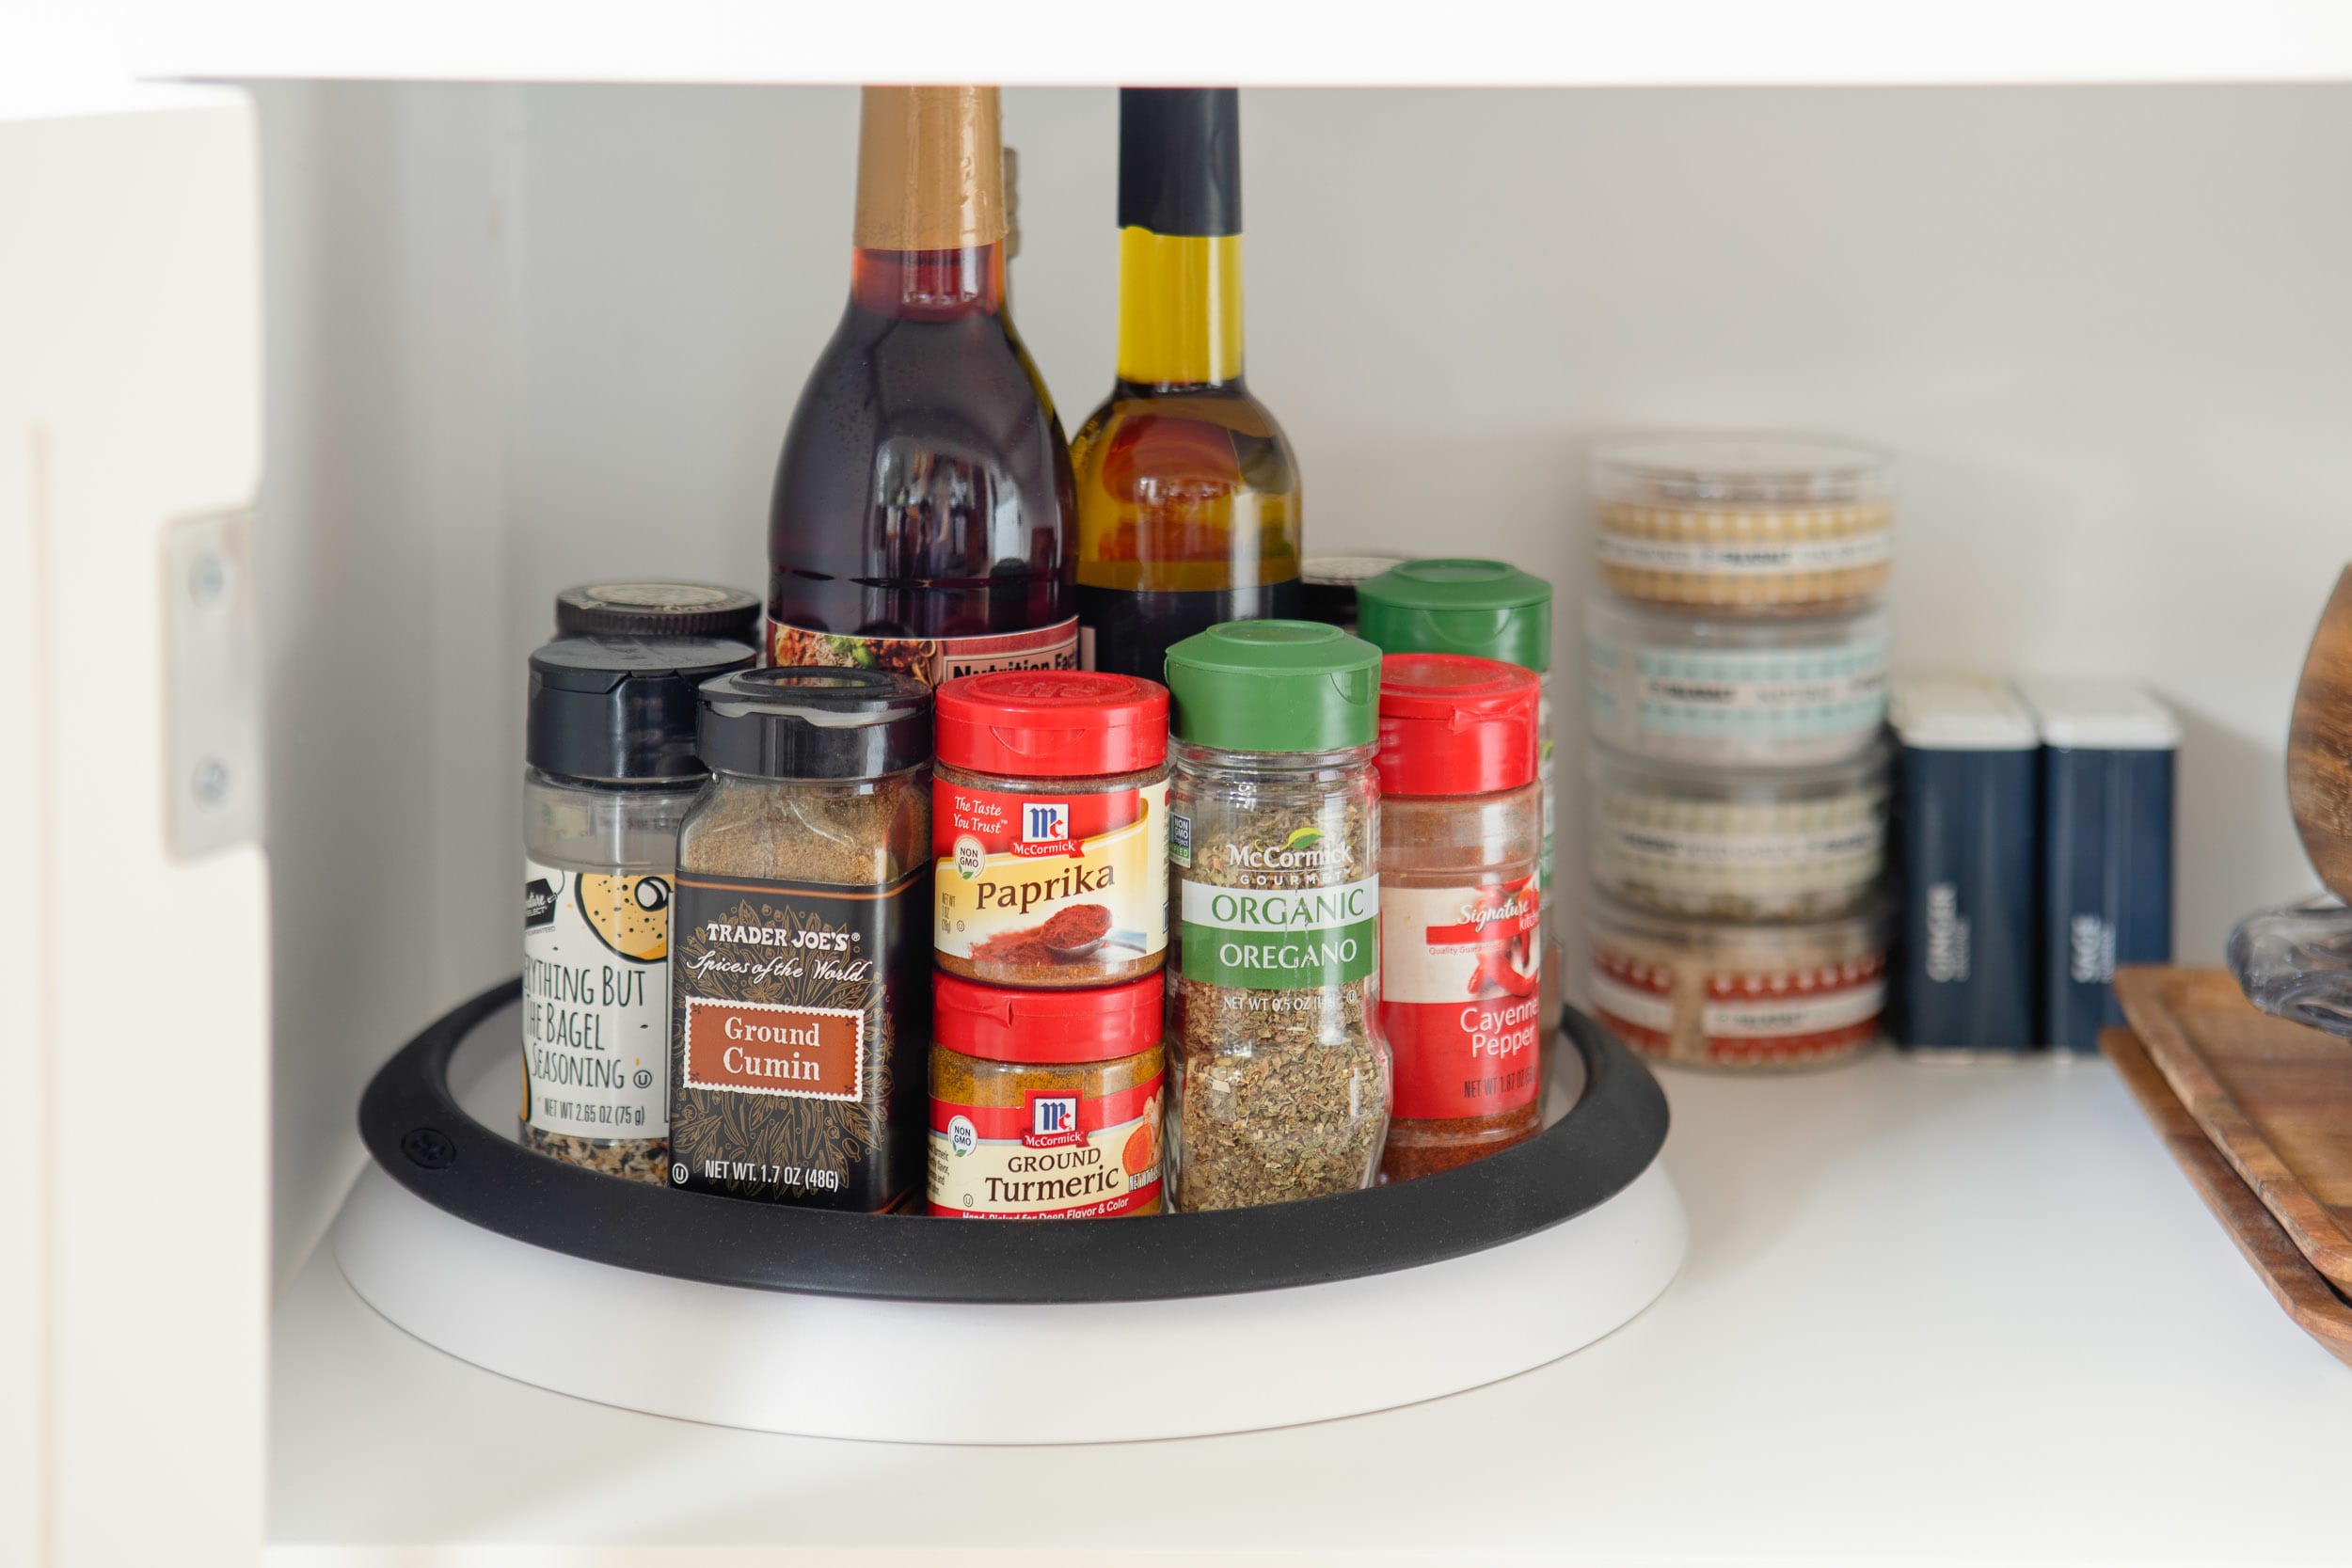 https://cdn.apartmenttherapy.info/image/upload/v1604614495/k/Photo/Lifestyle/2020-11-The-Lazy-Susan-Organizing-Trick-That-Every-Single-Home-Cook-Needs-to-Hear%20/Lazy-Susan-Spice-Rack-2_1.jpg